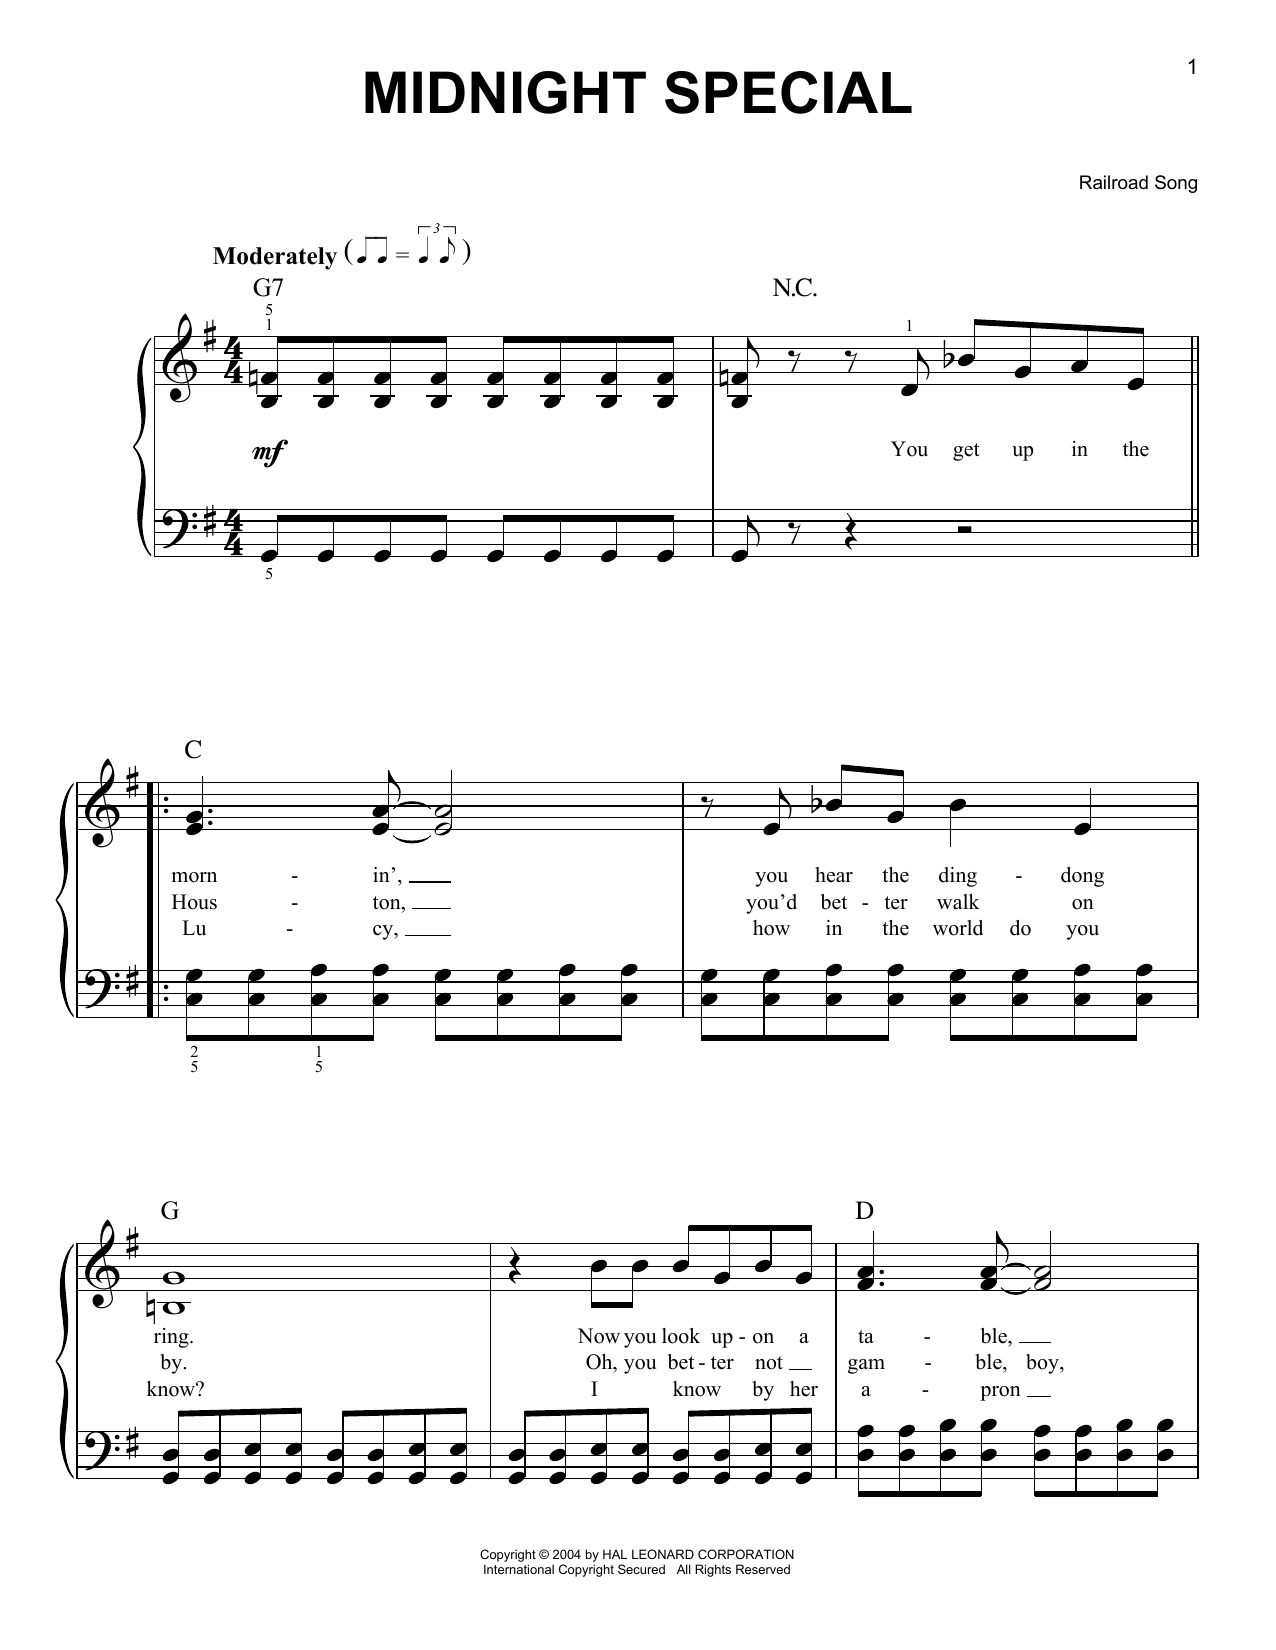 Railroad Song Midnight Special sheet music preview music notes and score for Guitar Tab including 2 page(s)